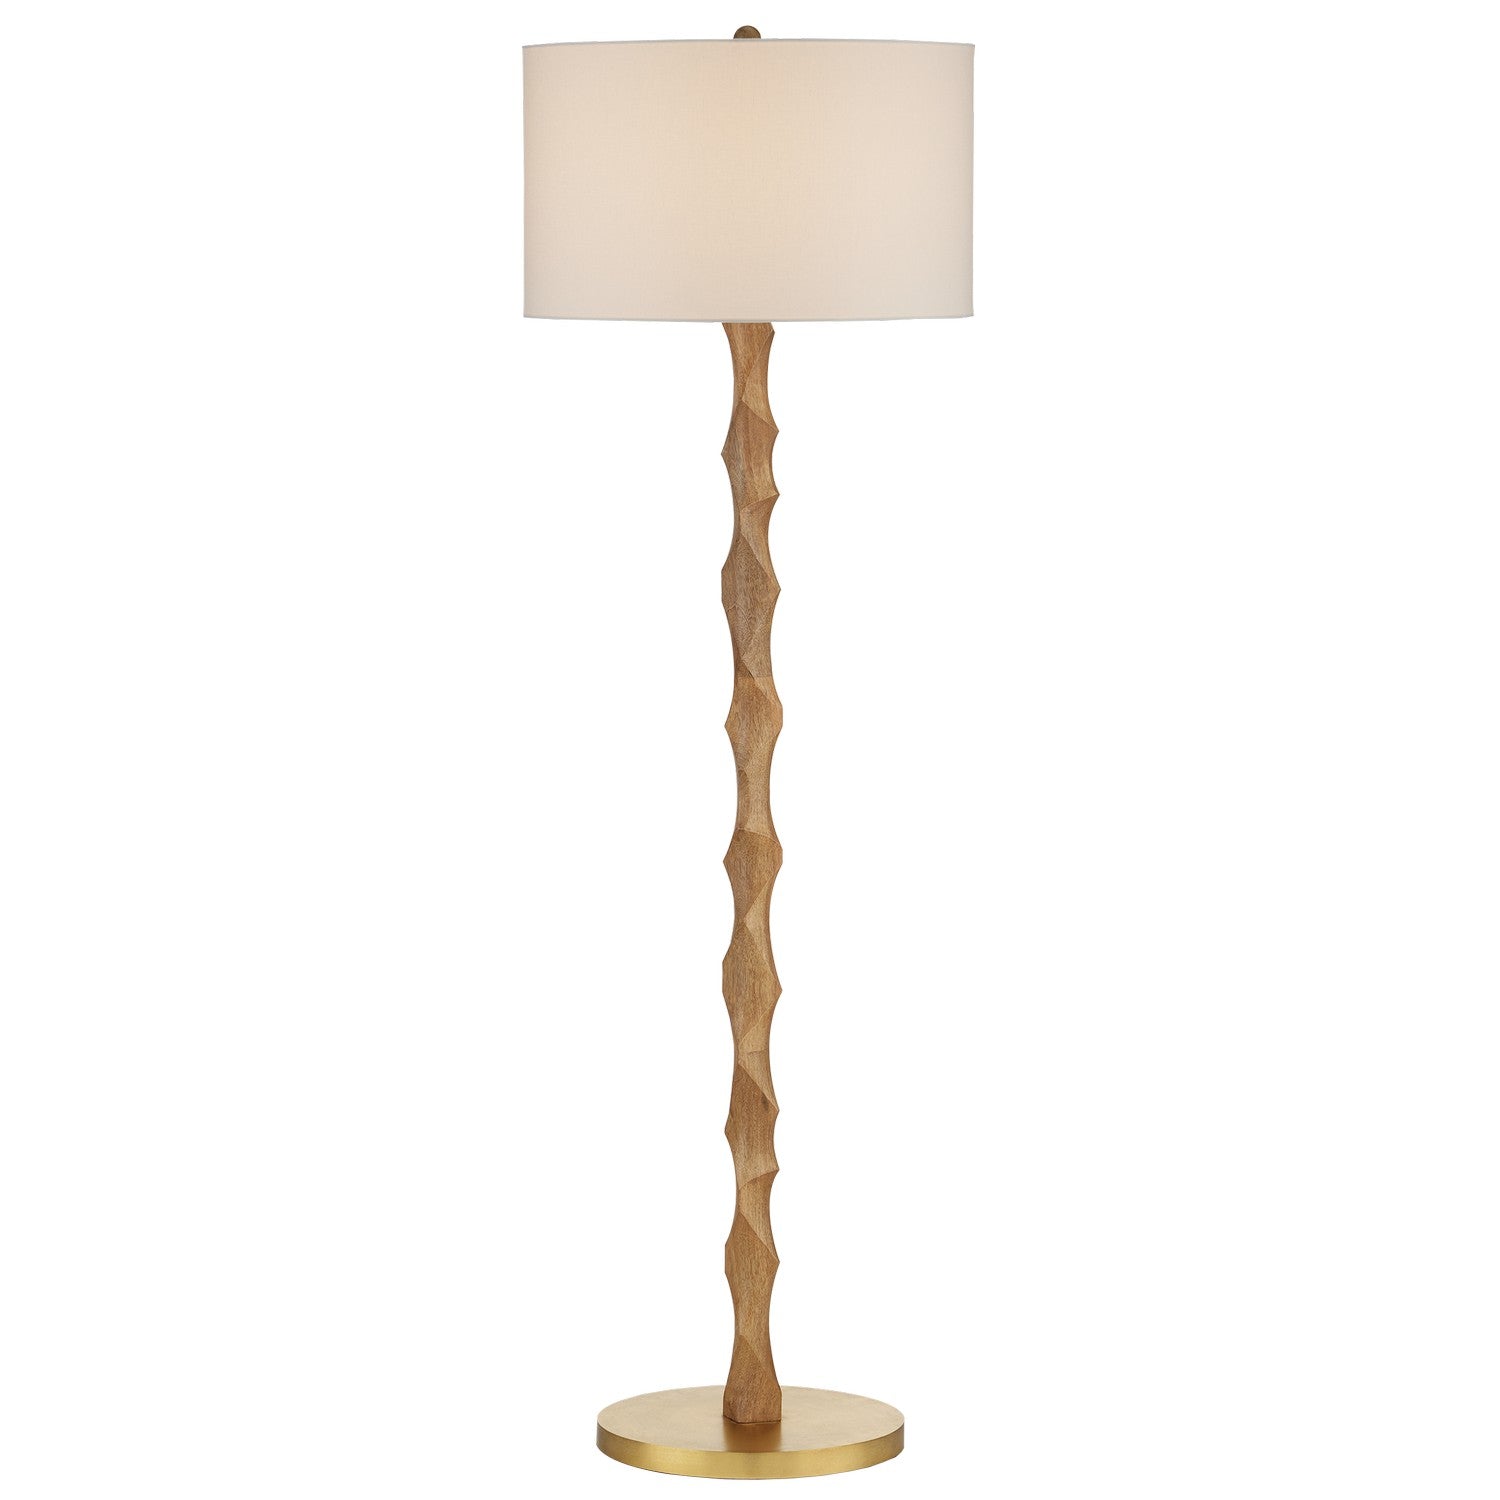 Currey and Company - 8000-0135 - One Light Floor Lamp - Natural/Brass